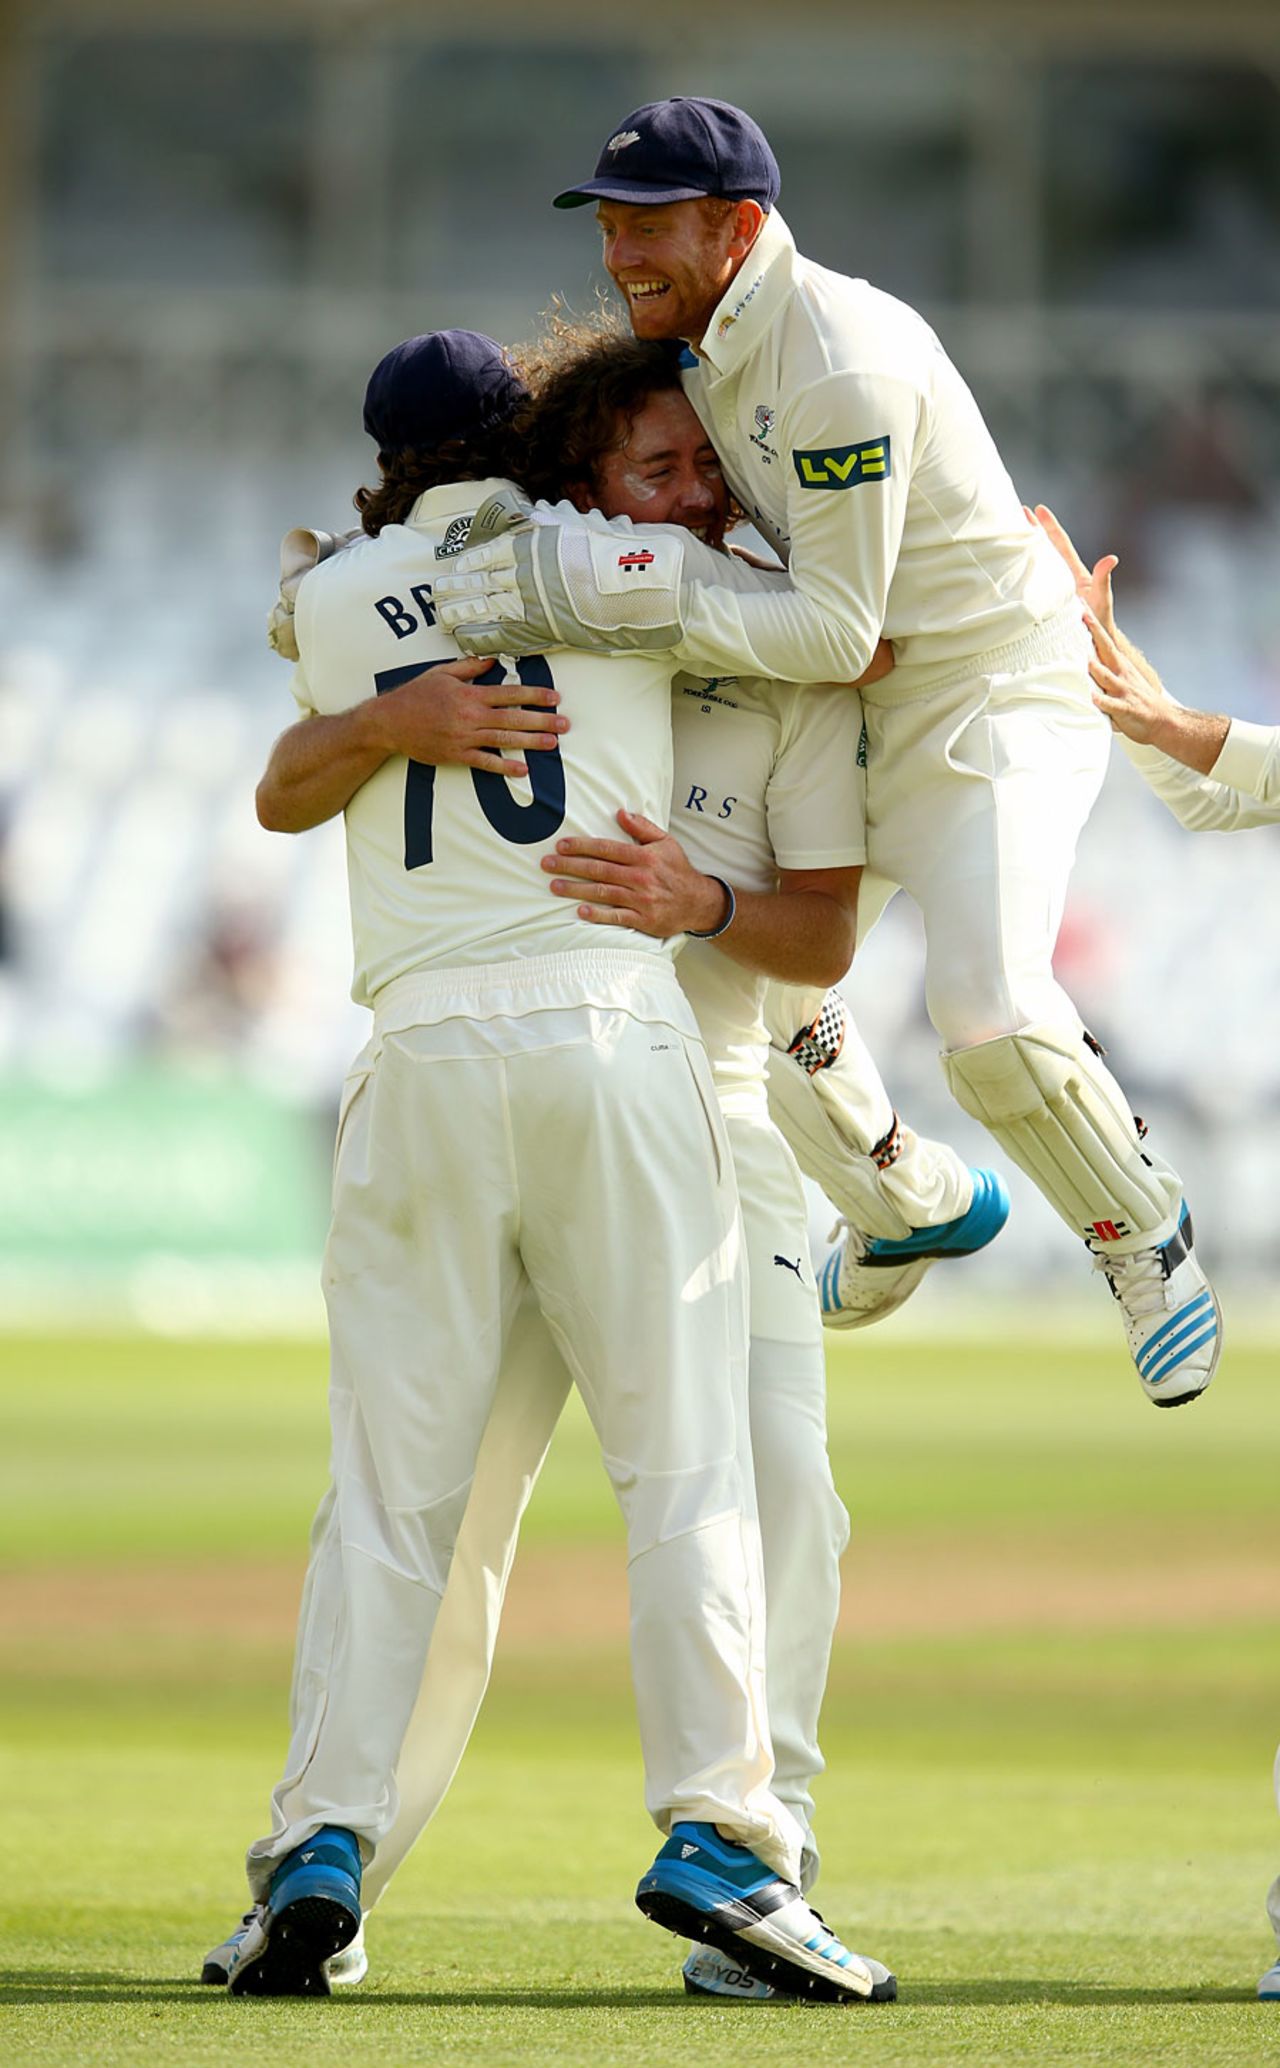 Yorkshire celebrate another wicket, Nottinghamshire v Yorkshire, County Championship, Division One, Trent Bridge, September 11, 2014